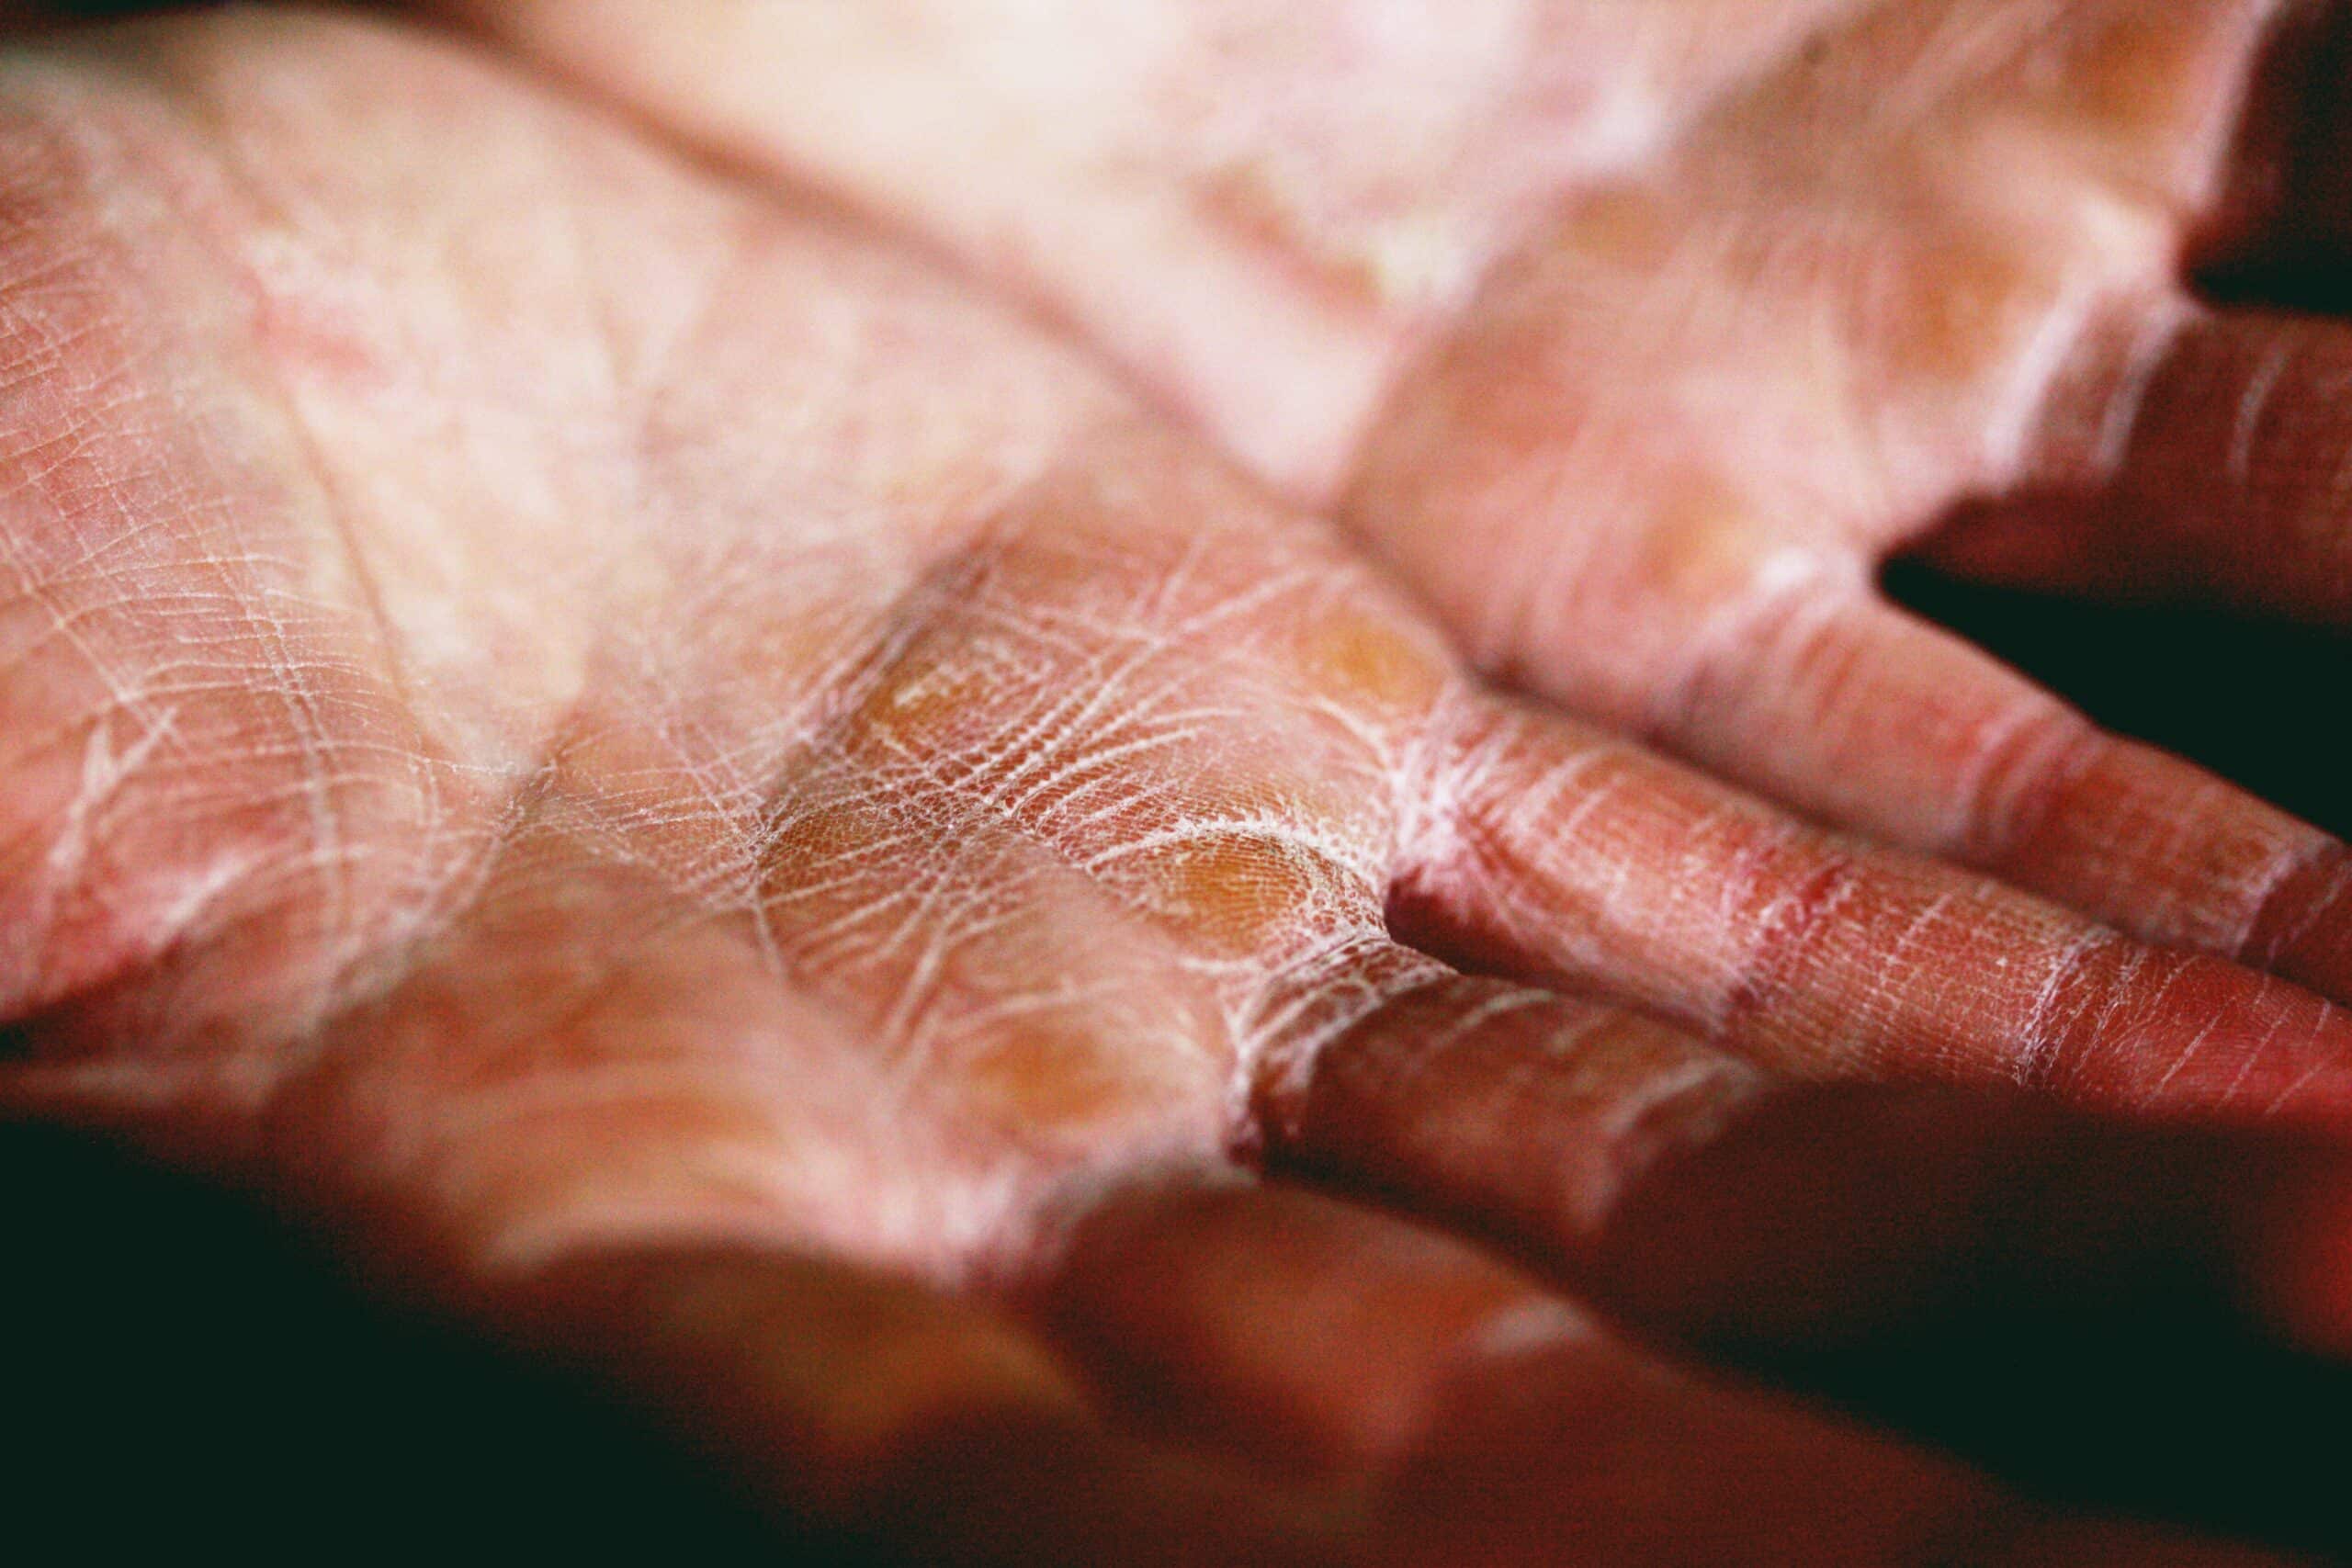 Image of a person's open palms. The skin on the person's hands is dry, rough, and in need of the healing benefits of shea butter.